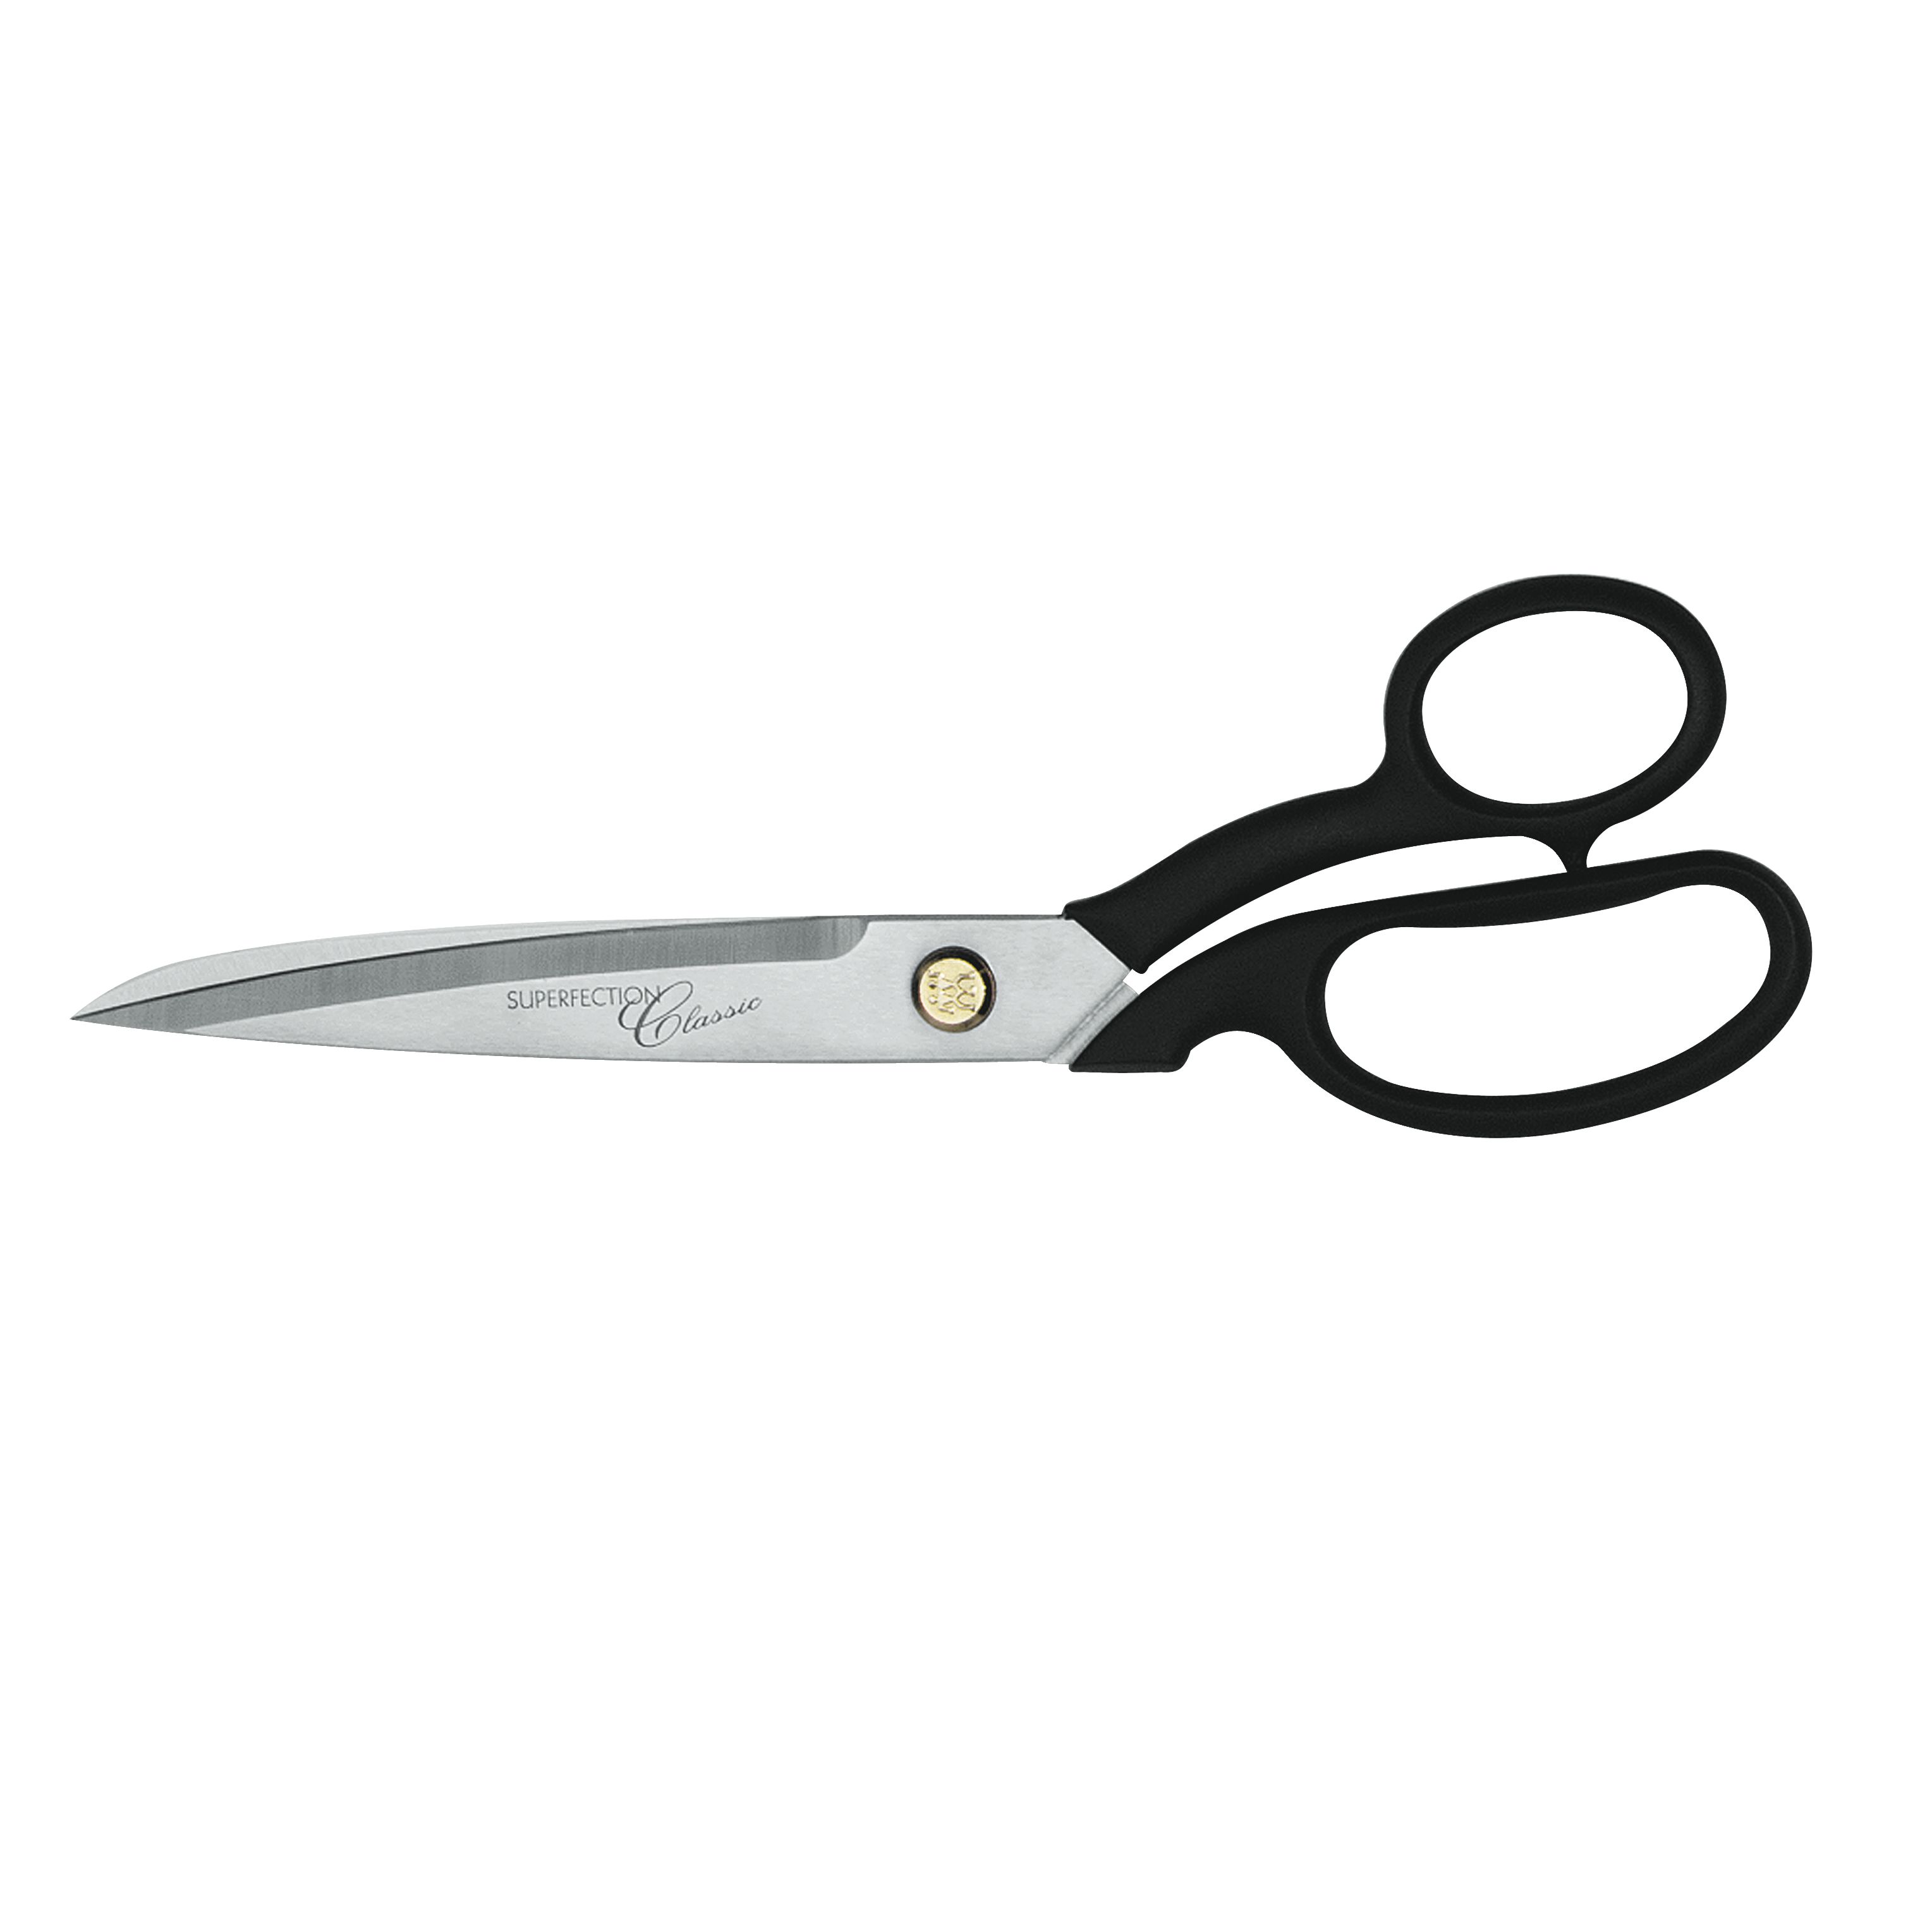 Zwilling Superfection Classic 9" Taylor's Shears